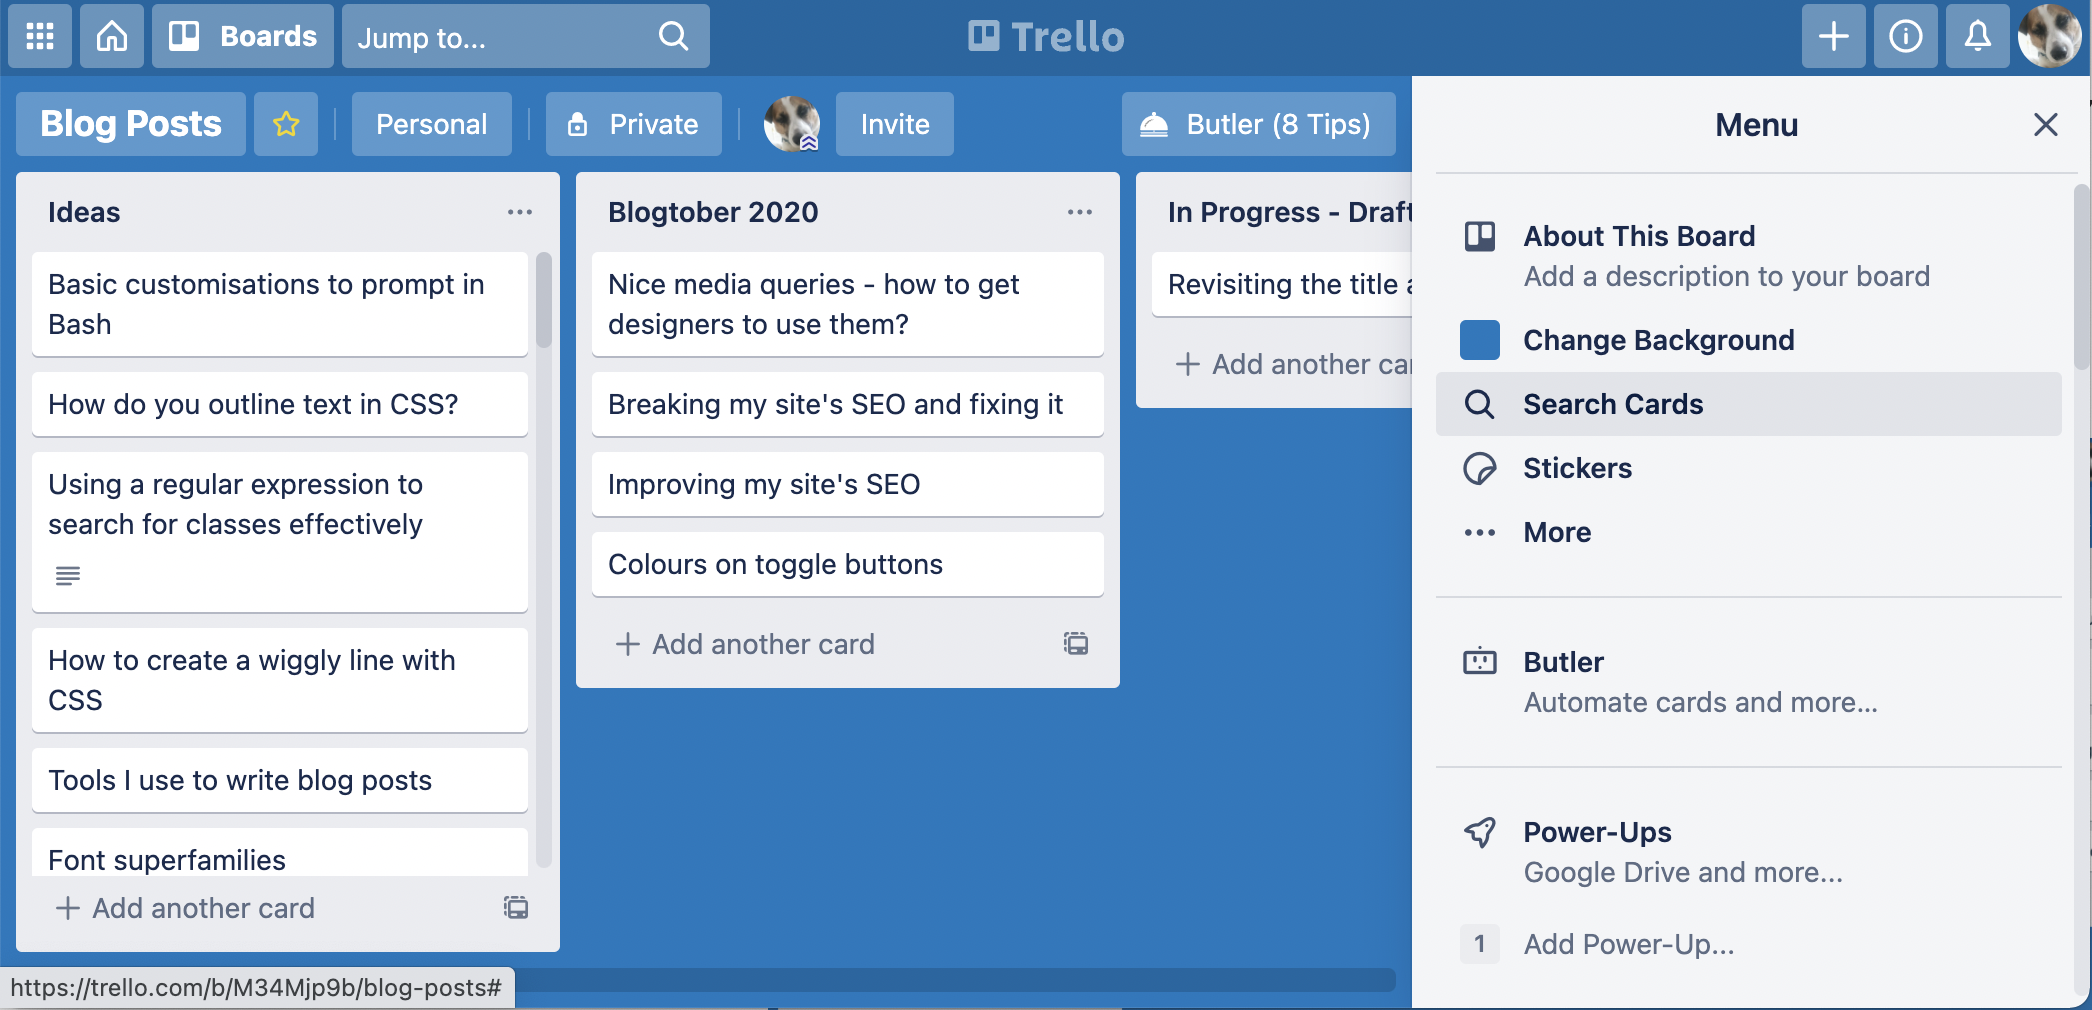 The Trello menu pop-out on the right of the screen